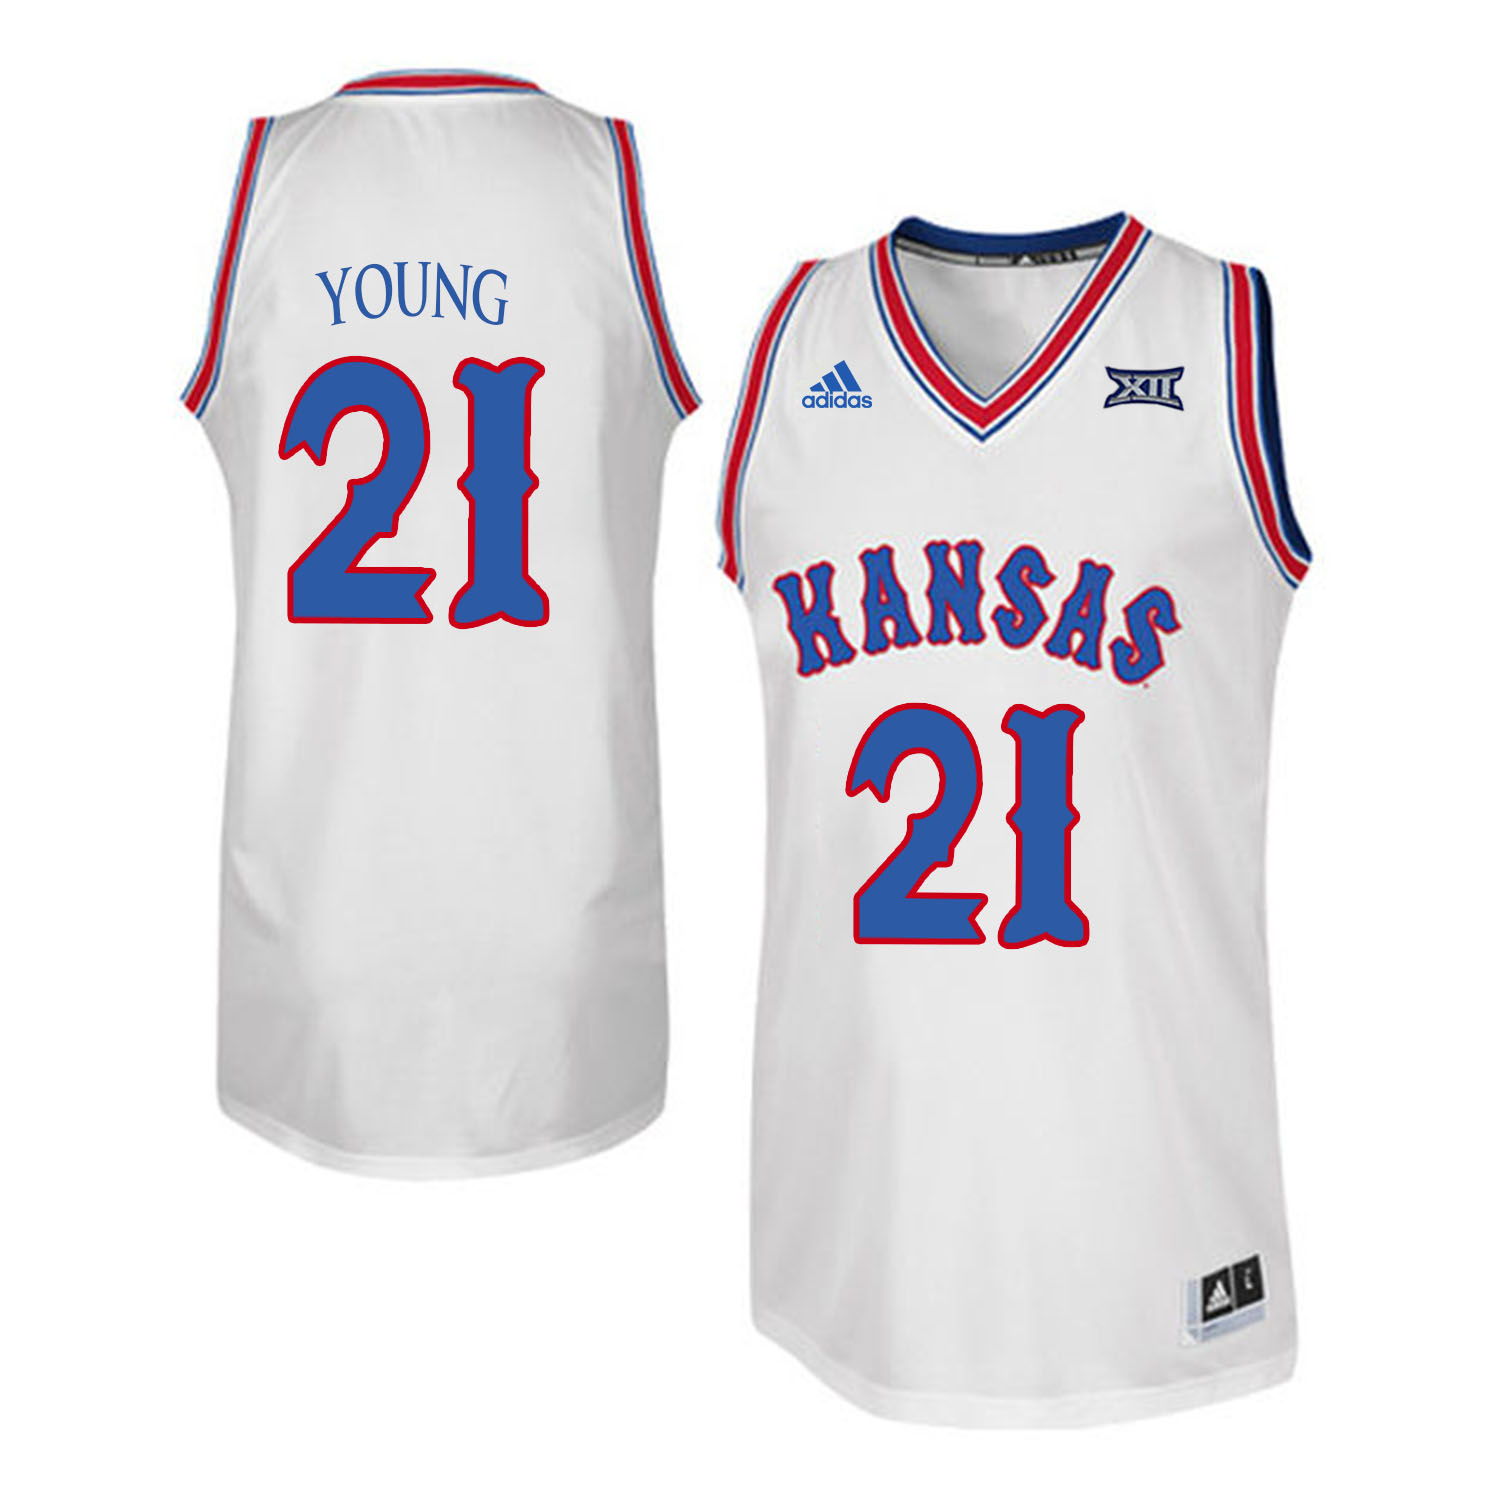 Kansas Jayhawks 21 Clay Young White Throwback College Basketball Jersey